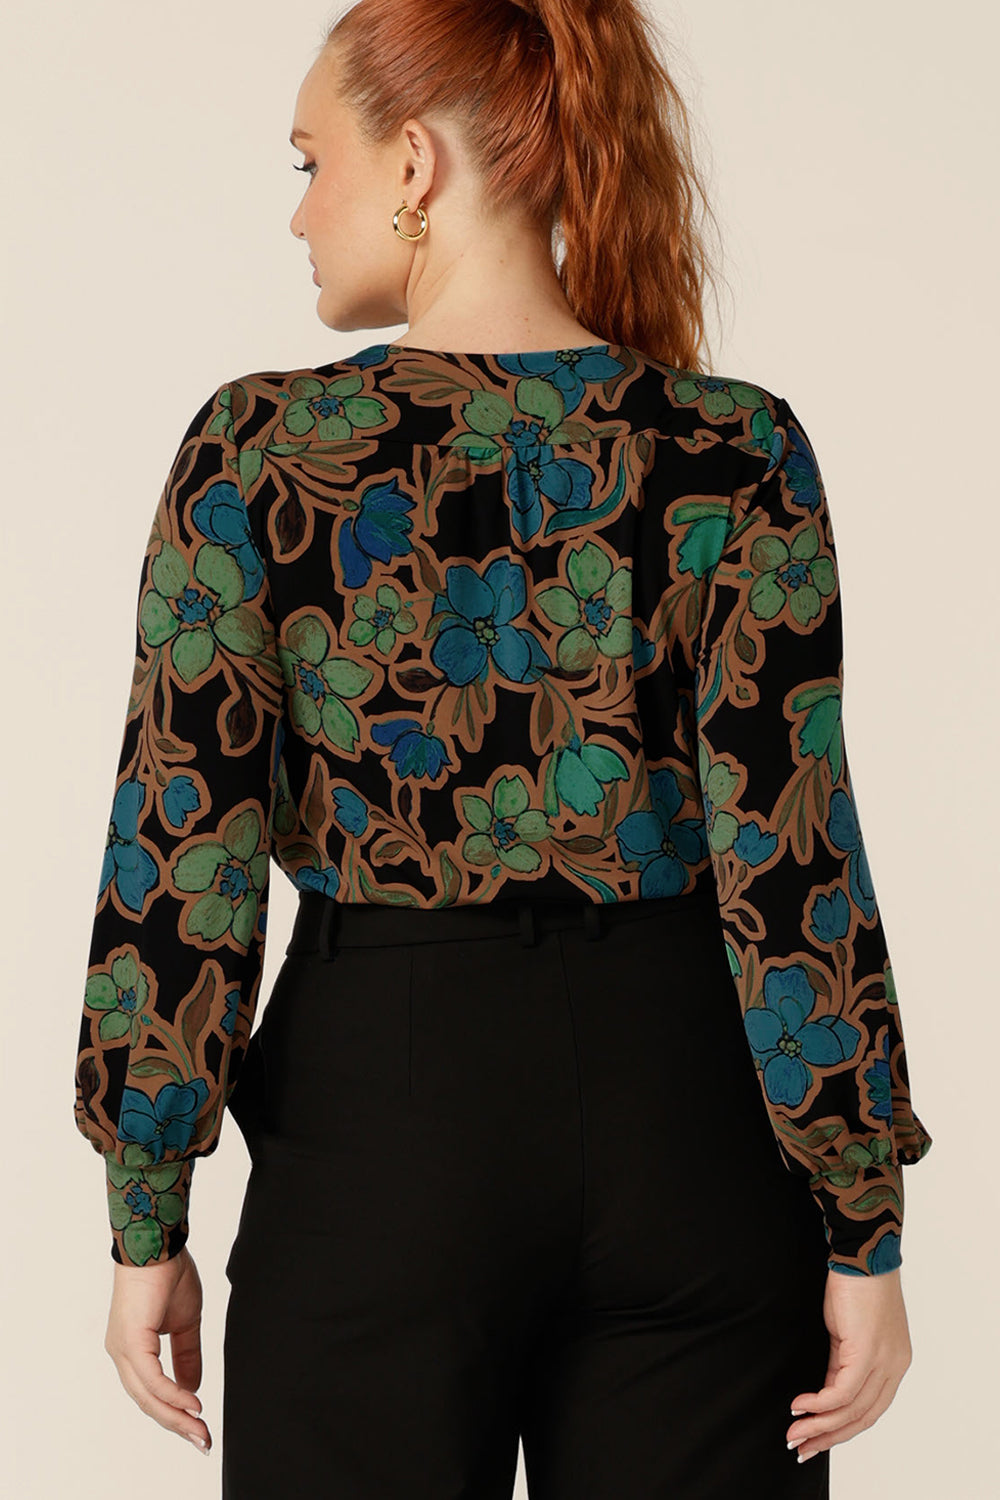 Back view of a size 12 woman wearing a long sleeve top with scoop neck. Feminine tailoring blouses full-length cuffed sleeves at the wrists to shape this floral print jersey top. Shop Australian-made tops in sizes 8 to 24.